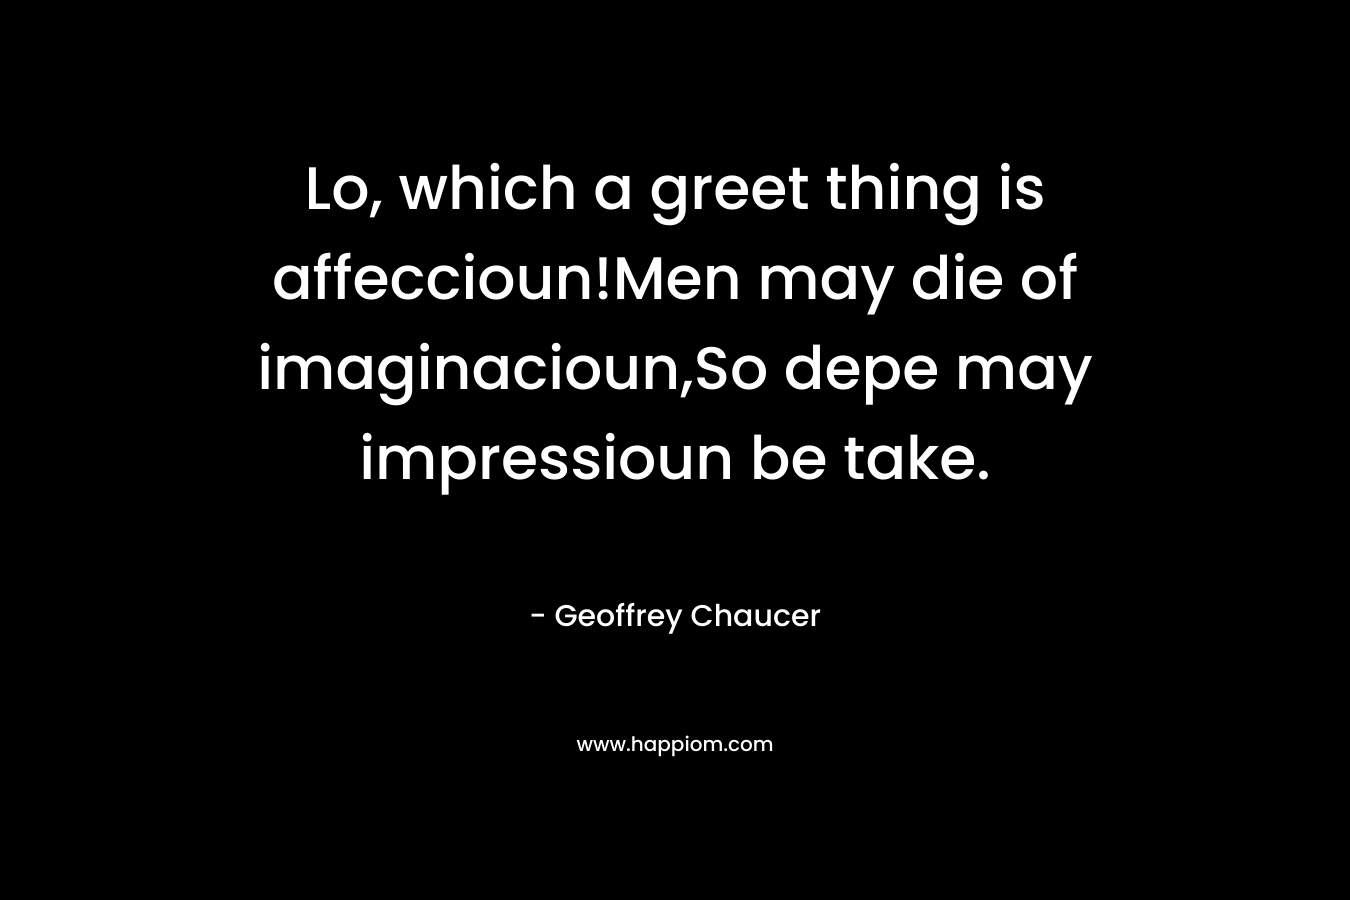 Lo, which a greet thing is affeccioun!Men may die of imaginacioun,So depe may impressioun be take. – Geoffrey Chaucer